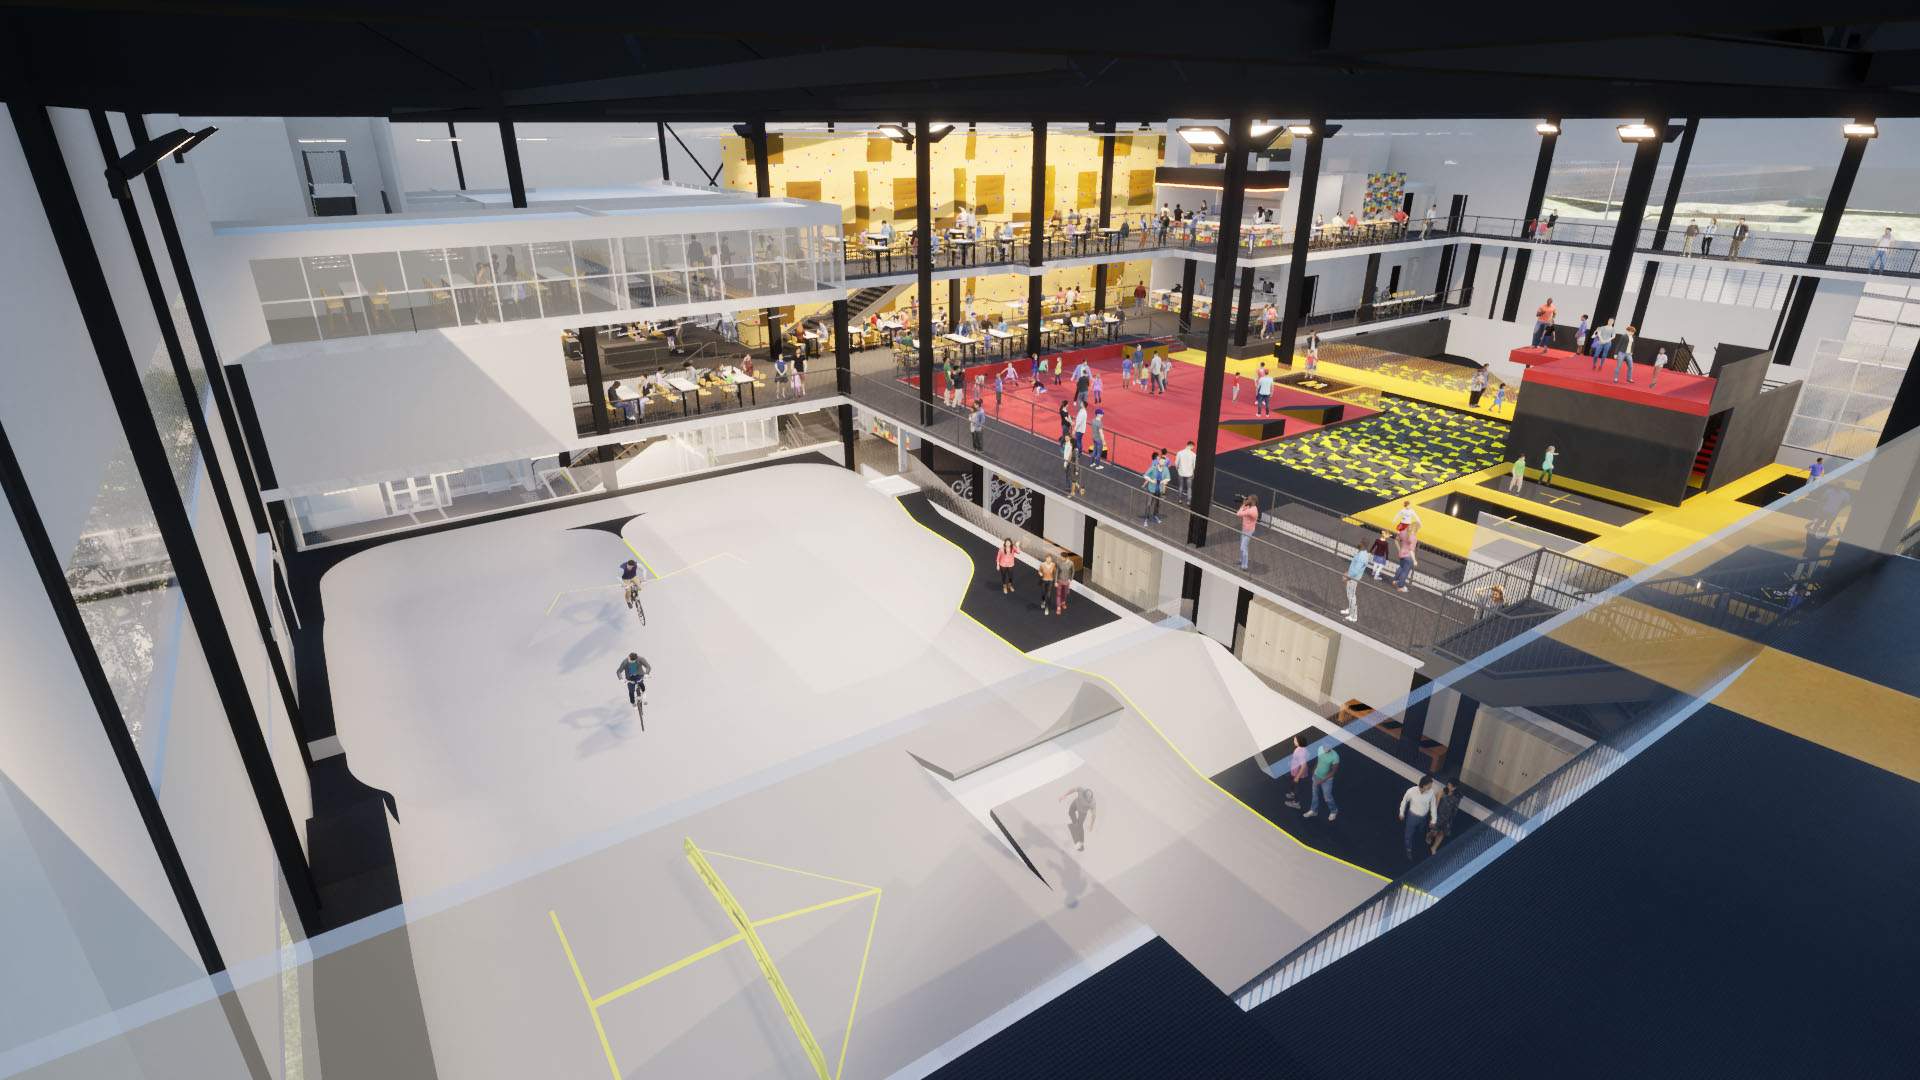 American Action Sports Chain Woodward Is Opening Its First Australian Centre in Sydney in 2024